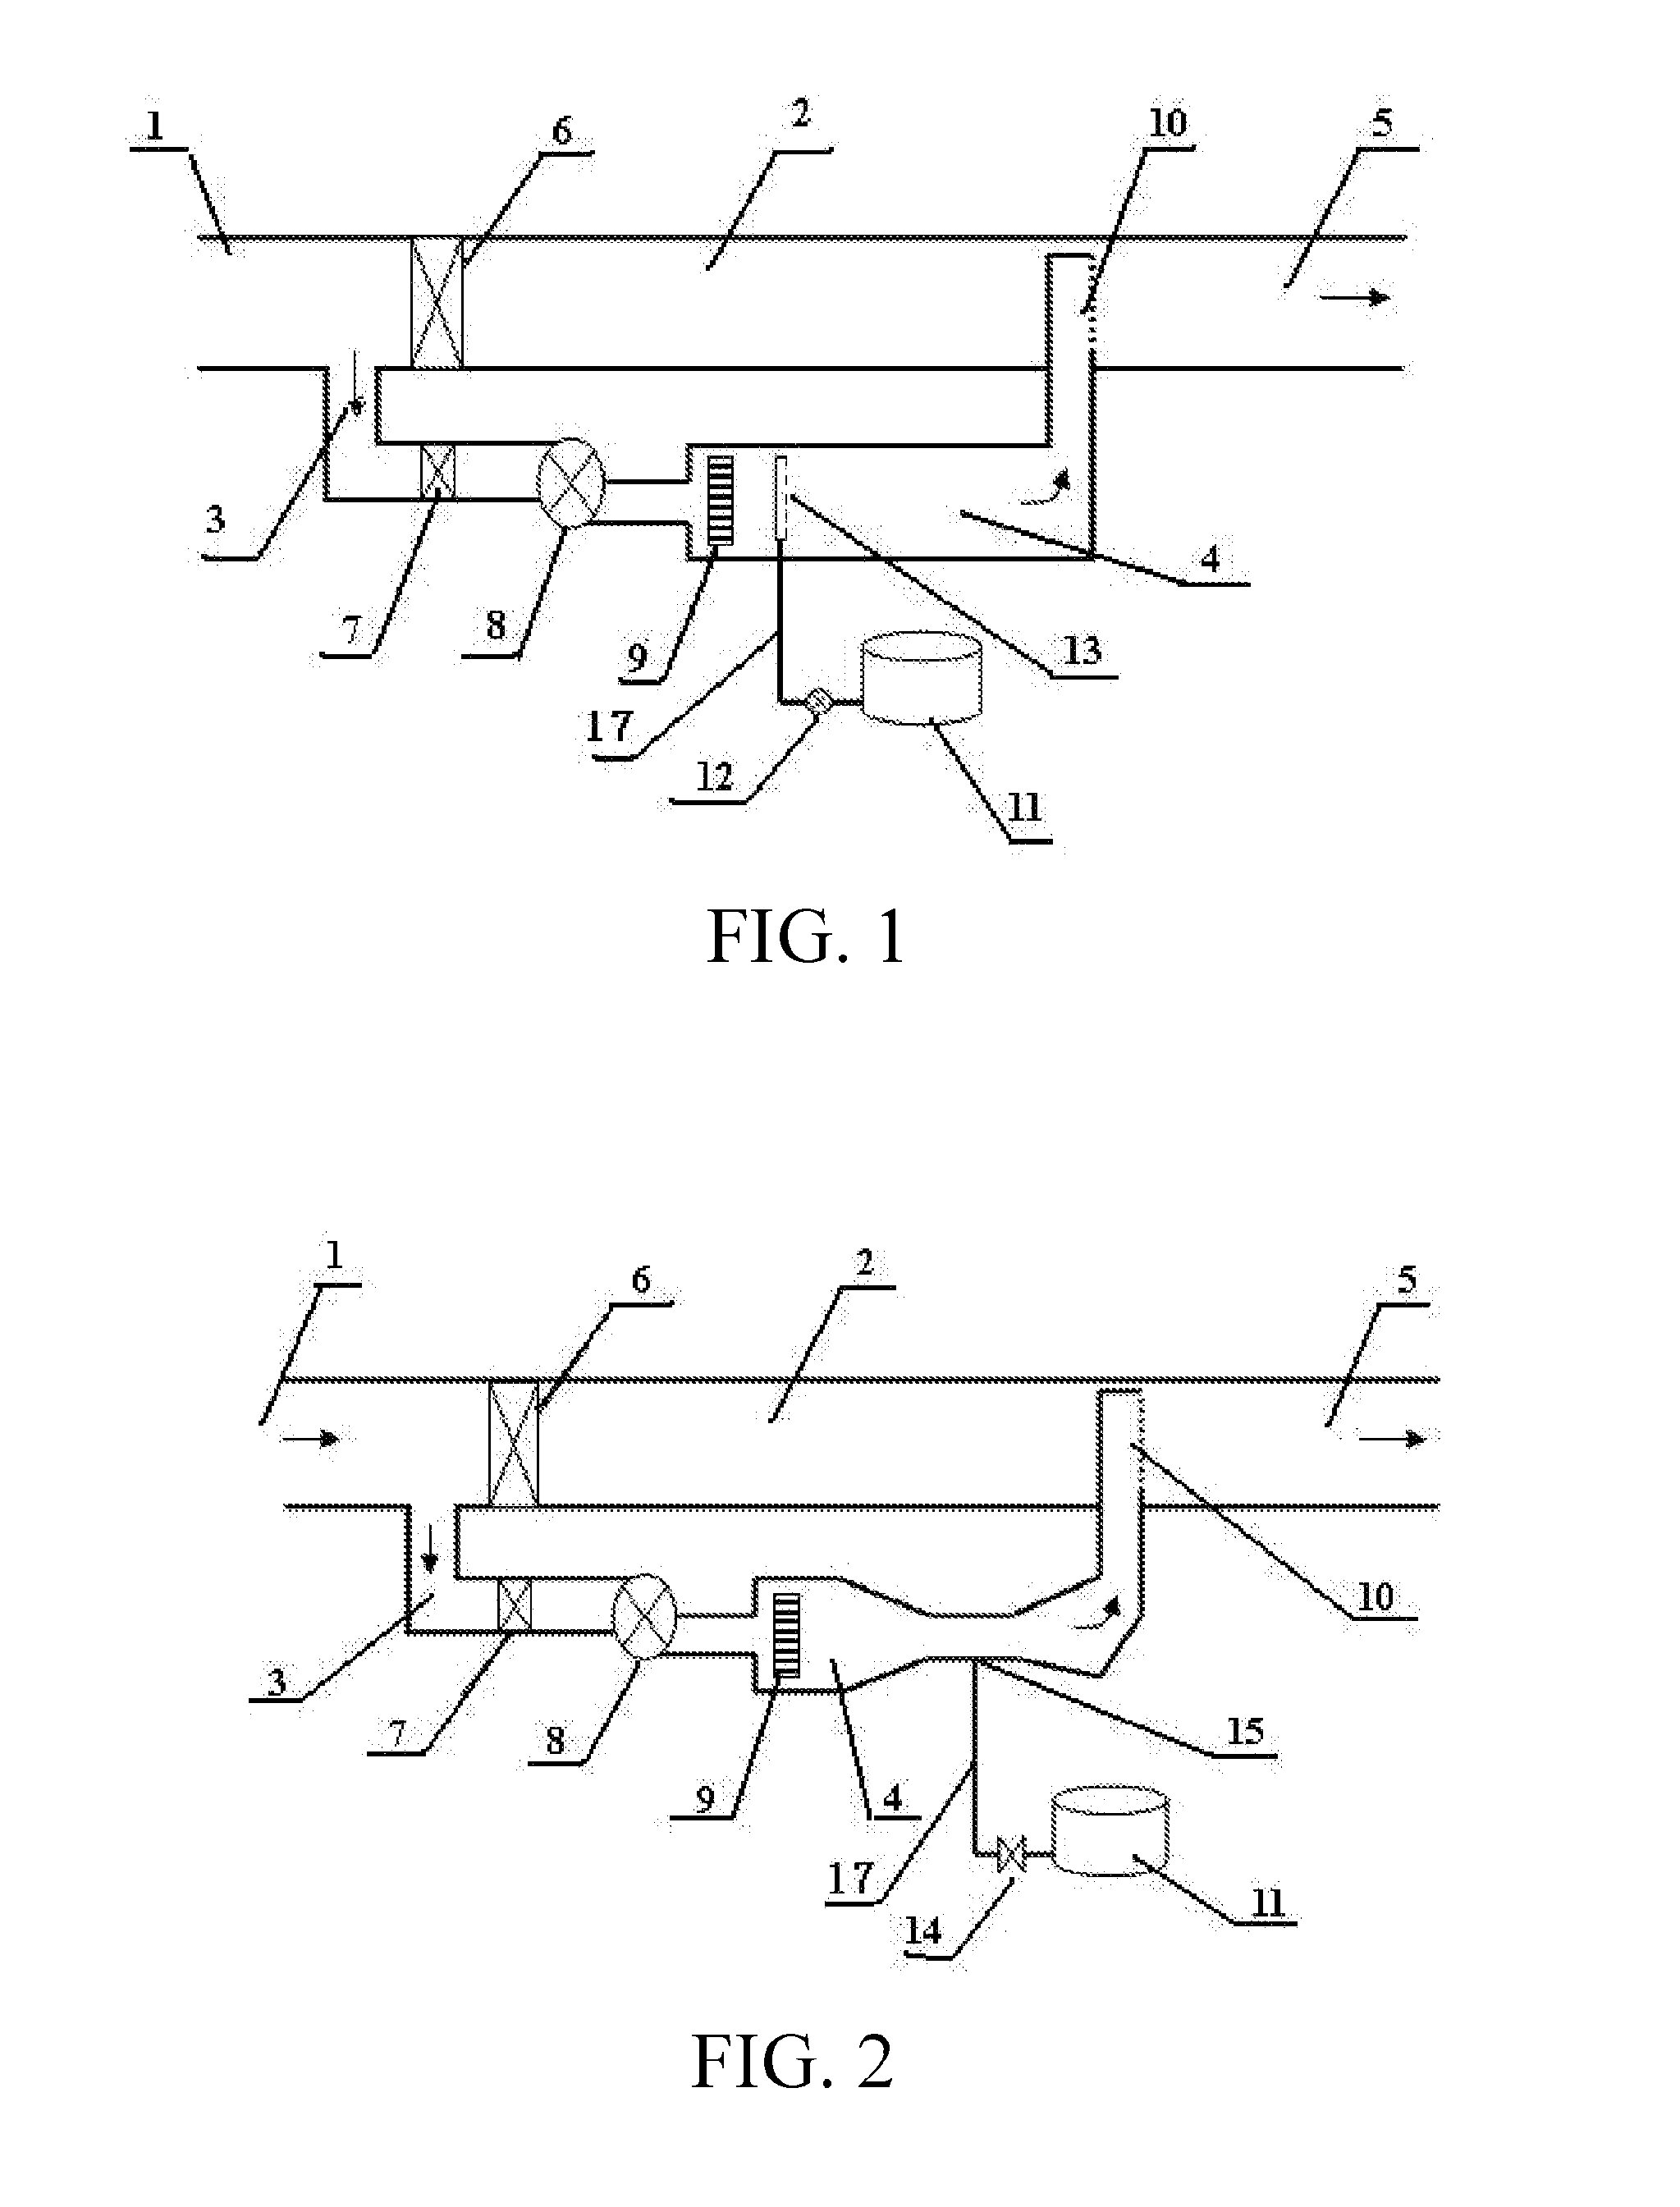 Process and apparatus for removal of nitrogen oxides, sulfur oxides and mercury from off gas through oxidization